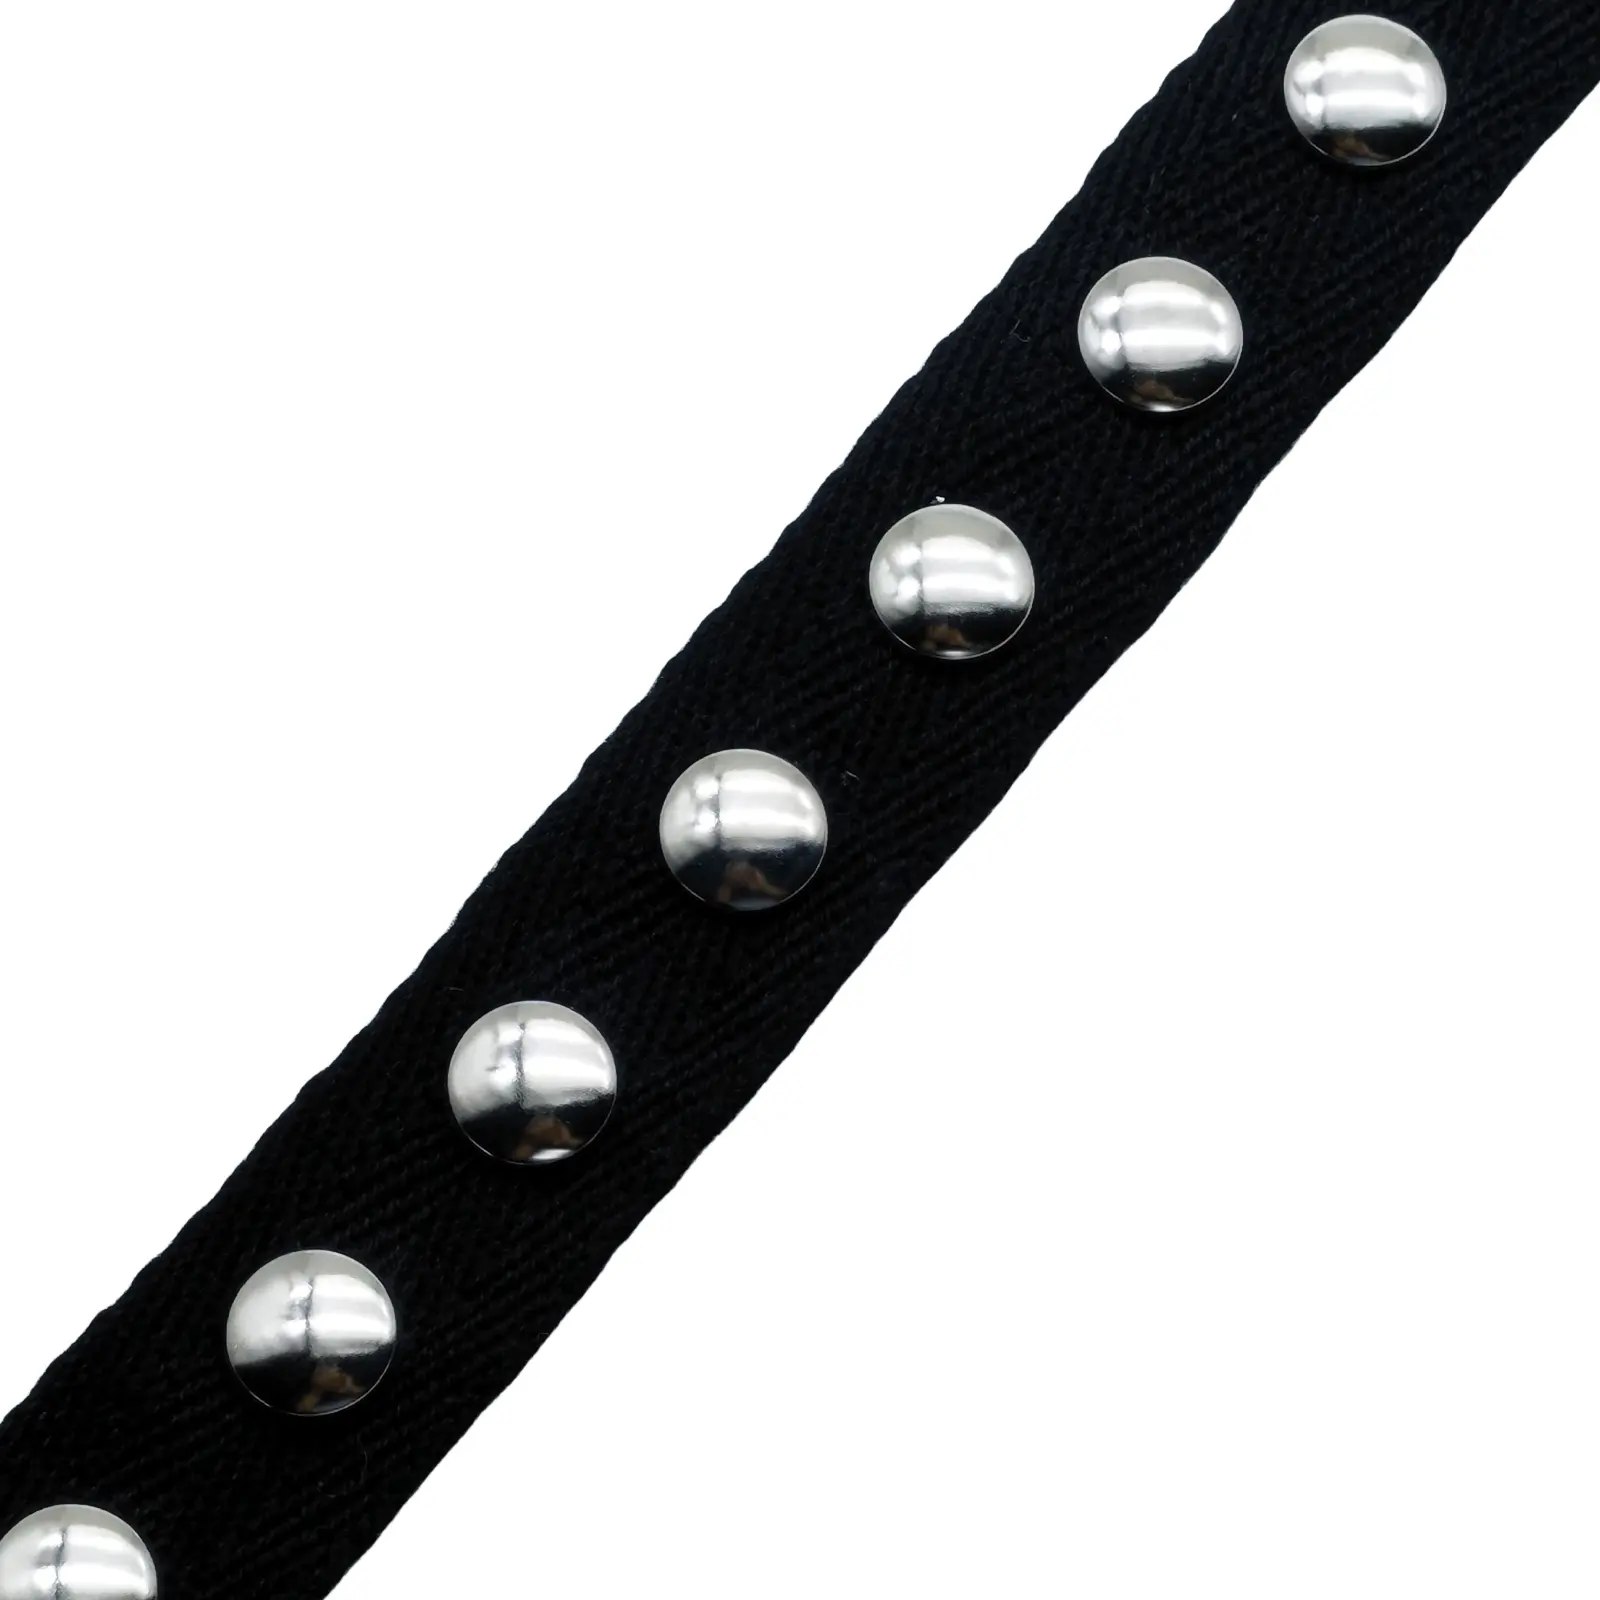 Amazon Hot Selling 2023 Garment Clothing Accessories Cotton Webbing Rivet Studded Black Cotton Tape